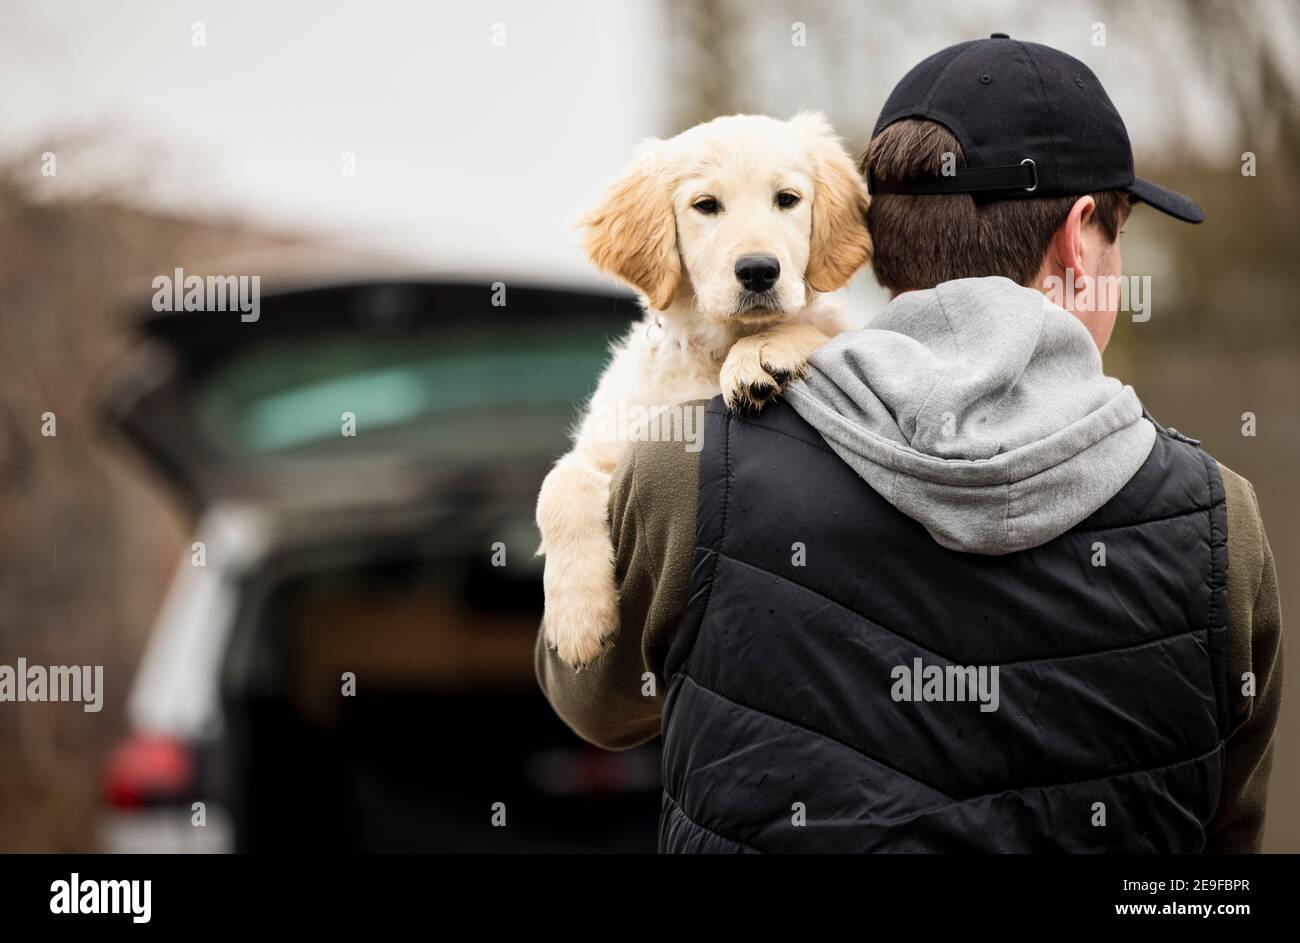 Male Criminal Stealing Or Dognapping Puppy During Health Lockdown Stock Photo